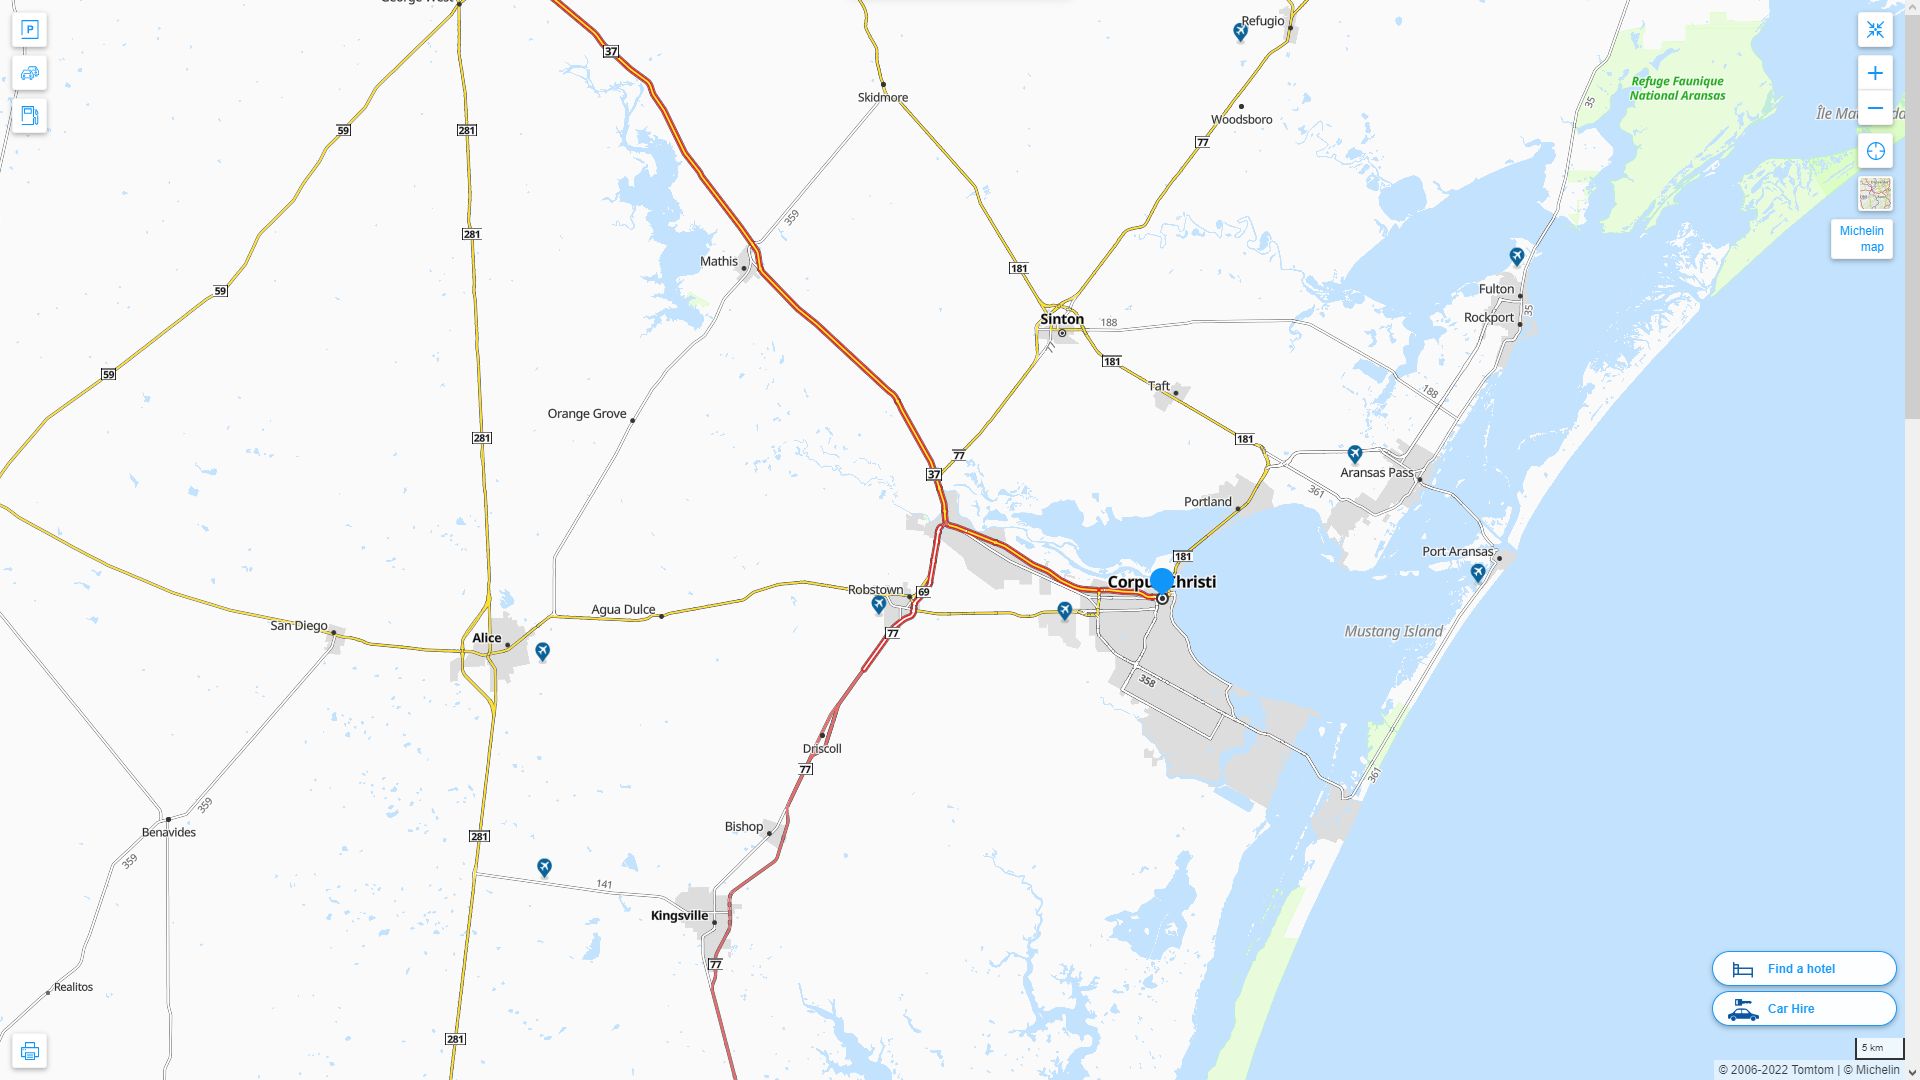 Corpus Christi Texas Highway and Road Map